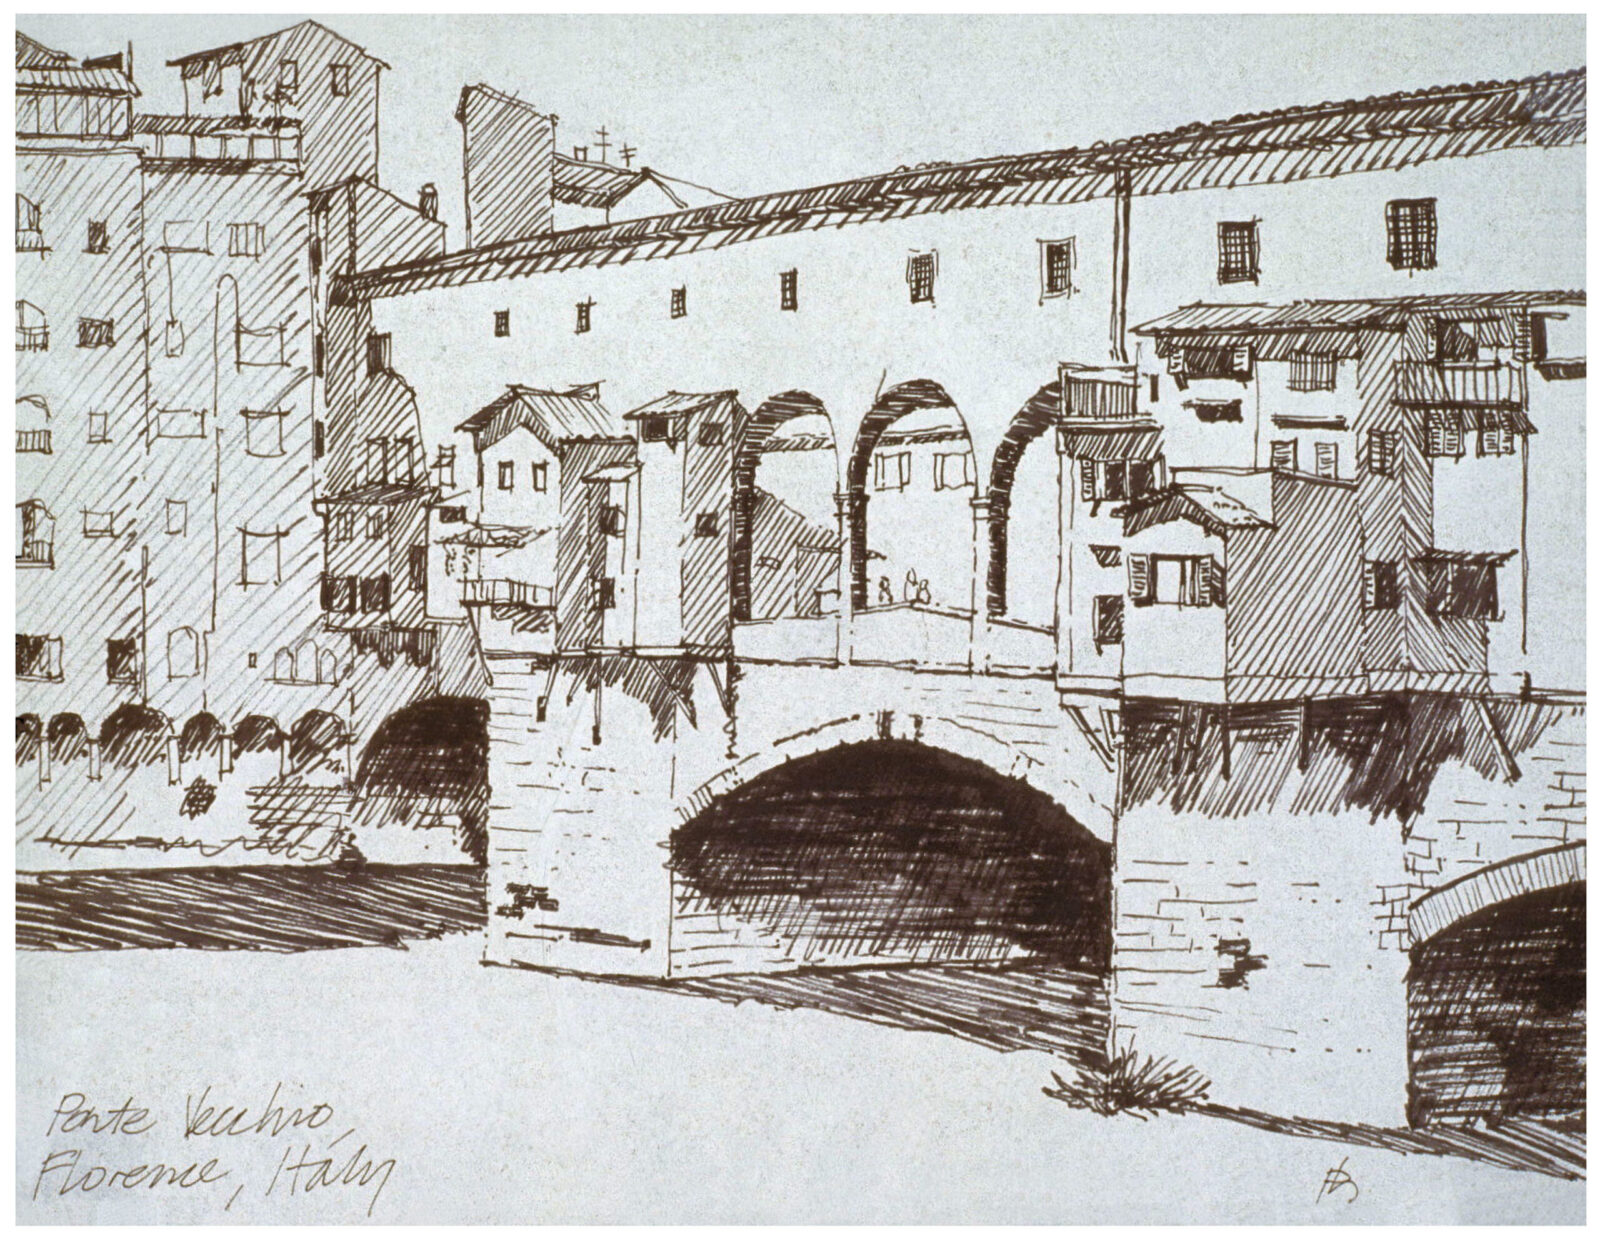 Patrick Hill's sketch of the Ponte Vecchio, Florence, Italy (1969)